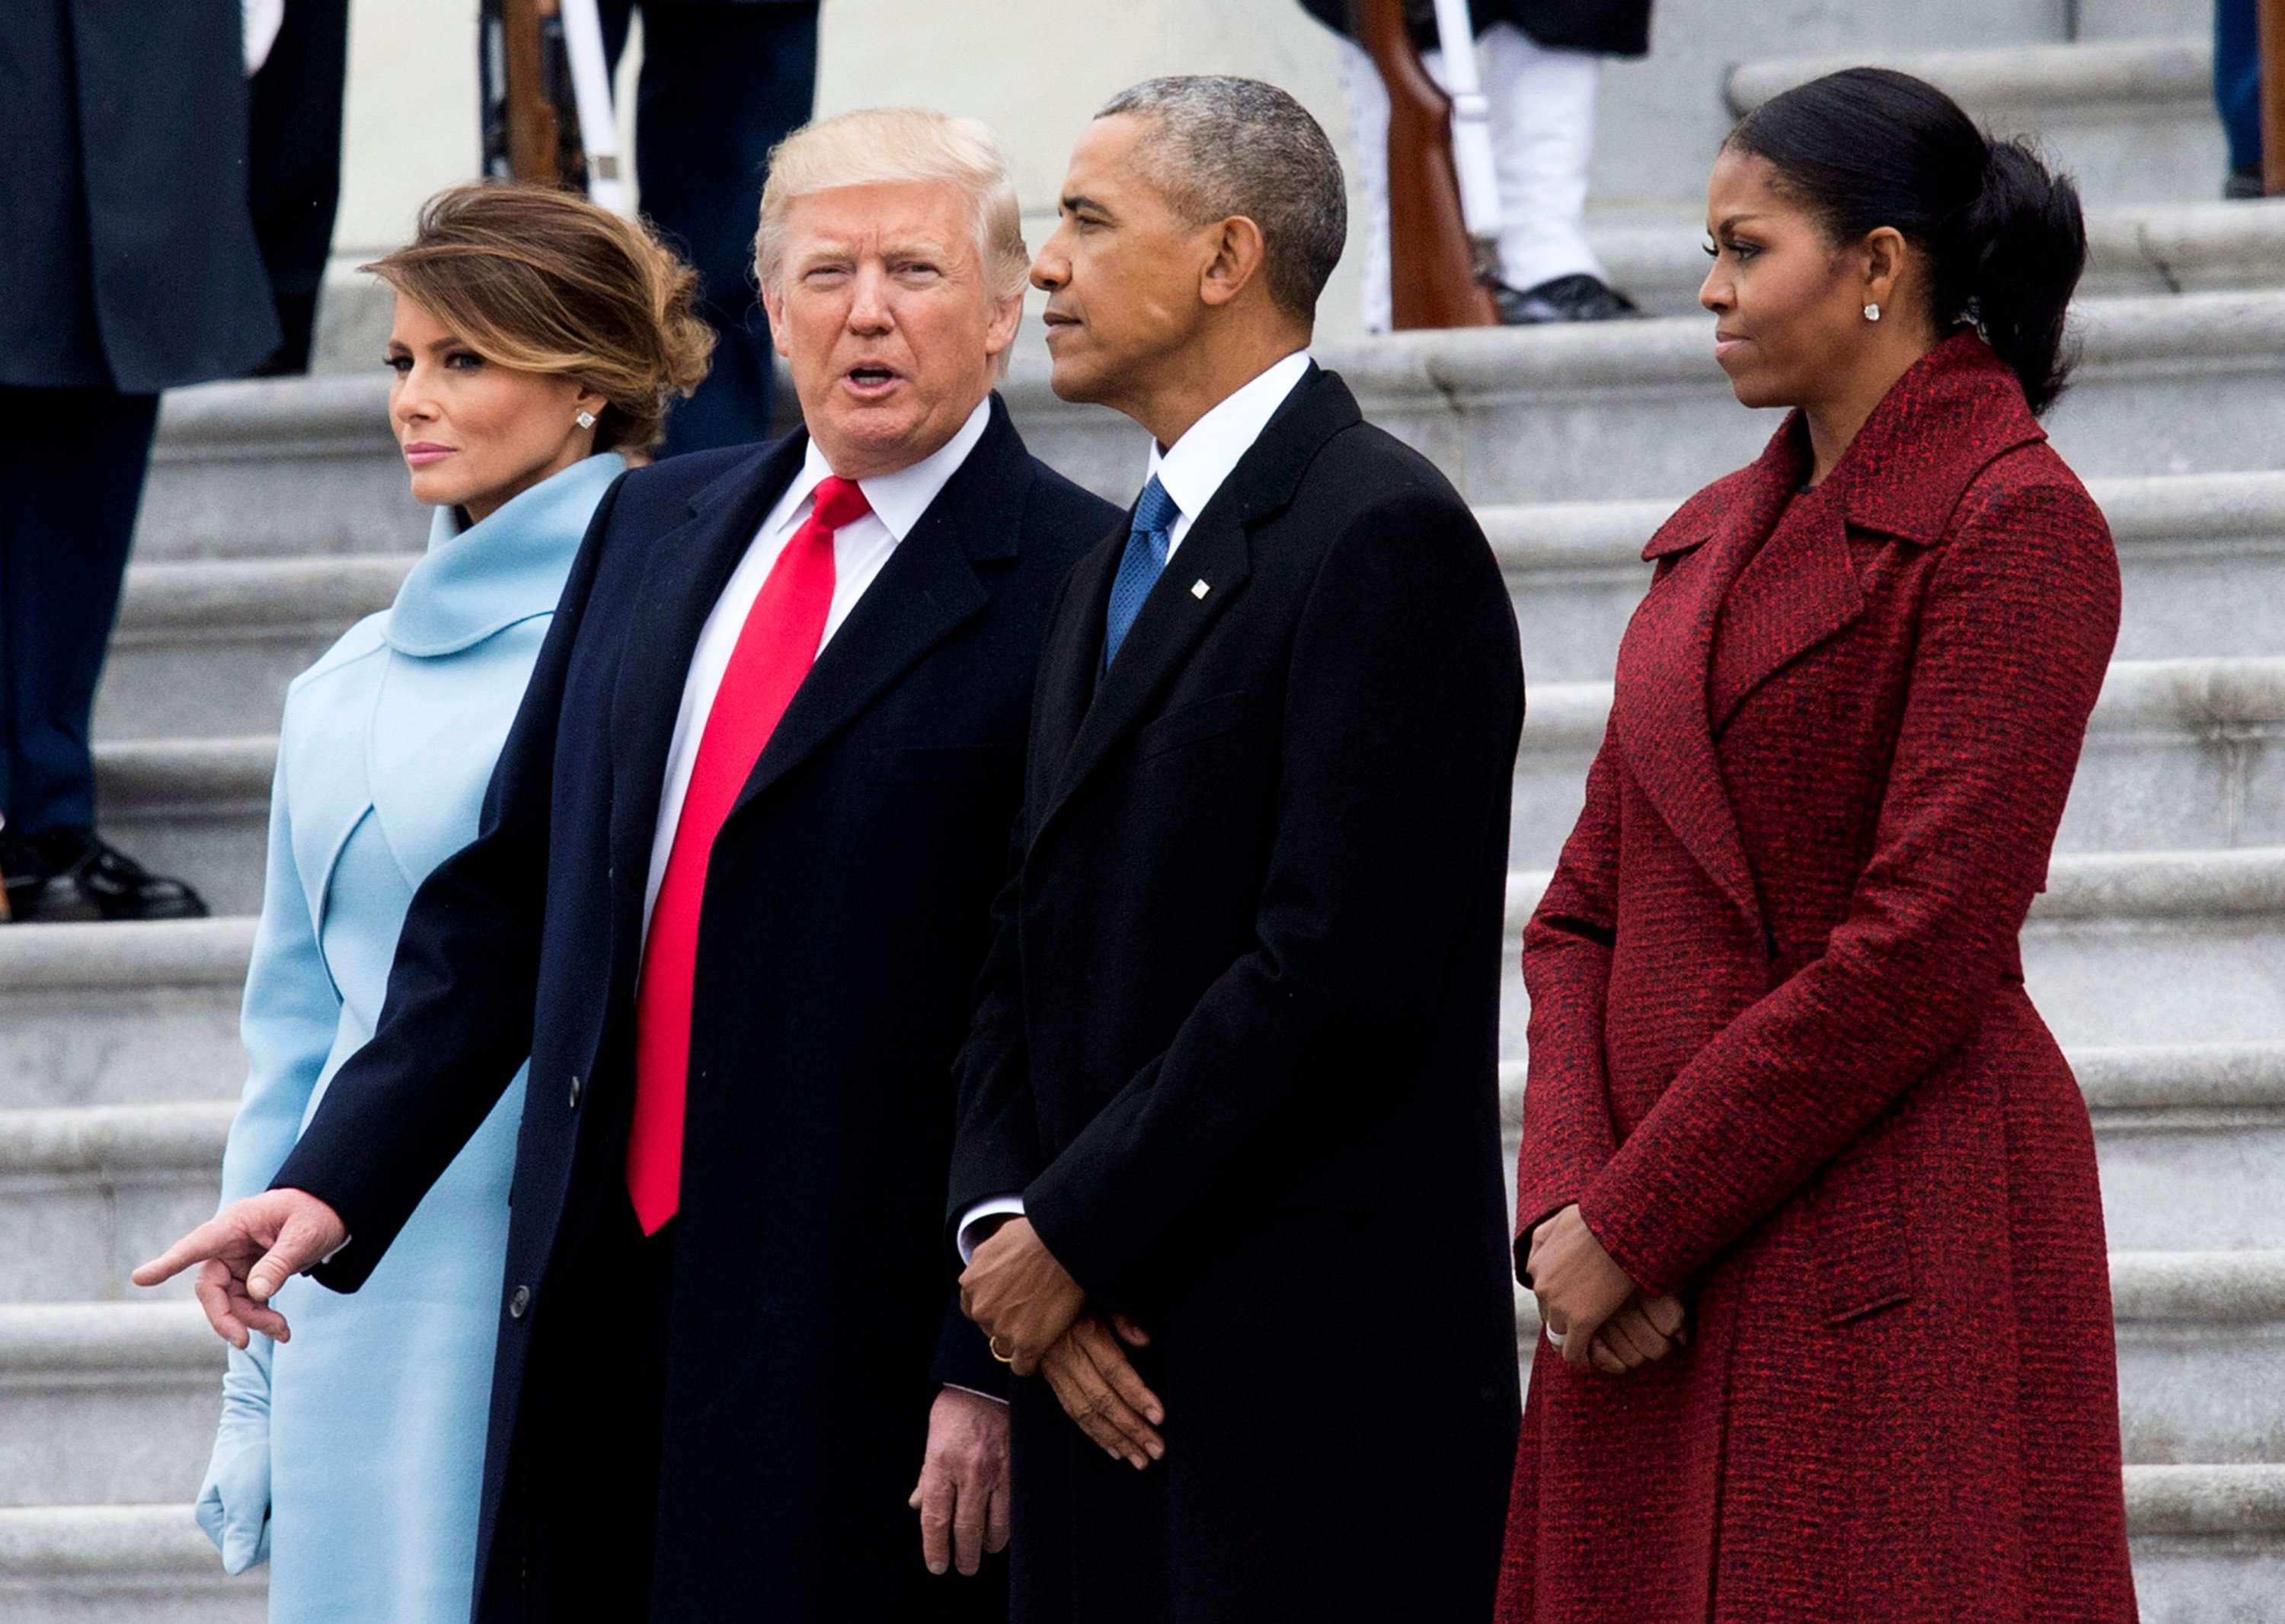 WASHINGTON, DC - JANUARY 20: President Donald Trump (2nd-L) First Lady Melania Trump (L), former President Barack Obama (2nd-R) and former First Lady Michelle Obama walk together following the inauguration, on Capitol Hill in Washington, D.C. on January 20, 2017. President-Elect Donald Trump was sworn-in as the 45th President. (Photo by Kevin Dietsch - Pool/Getty Images)